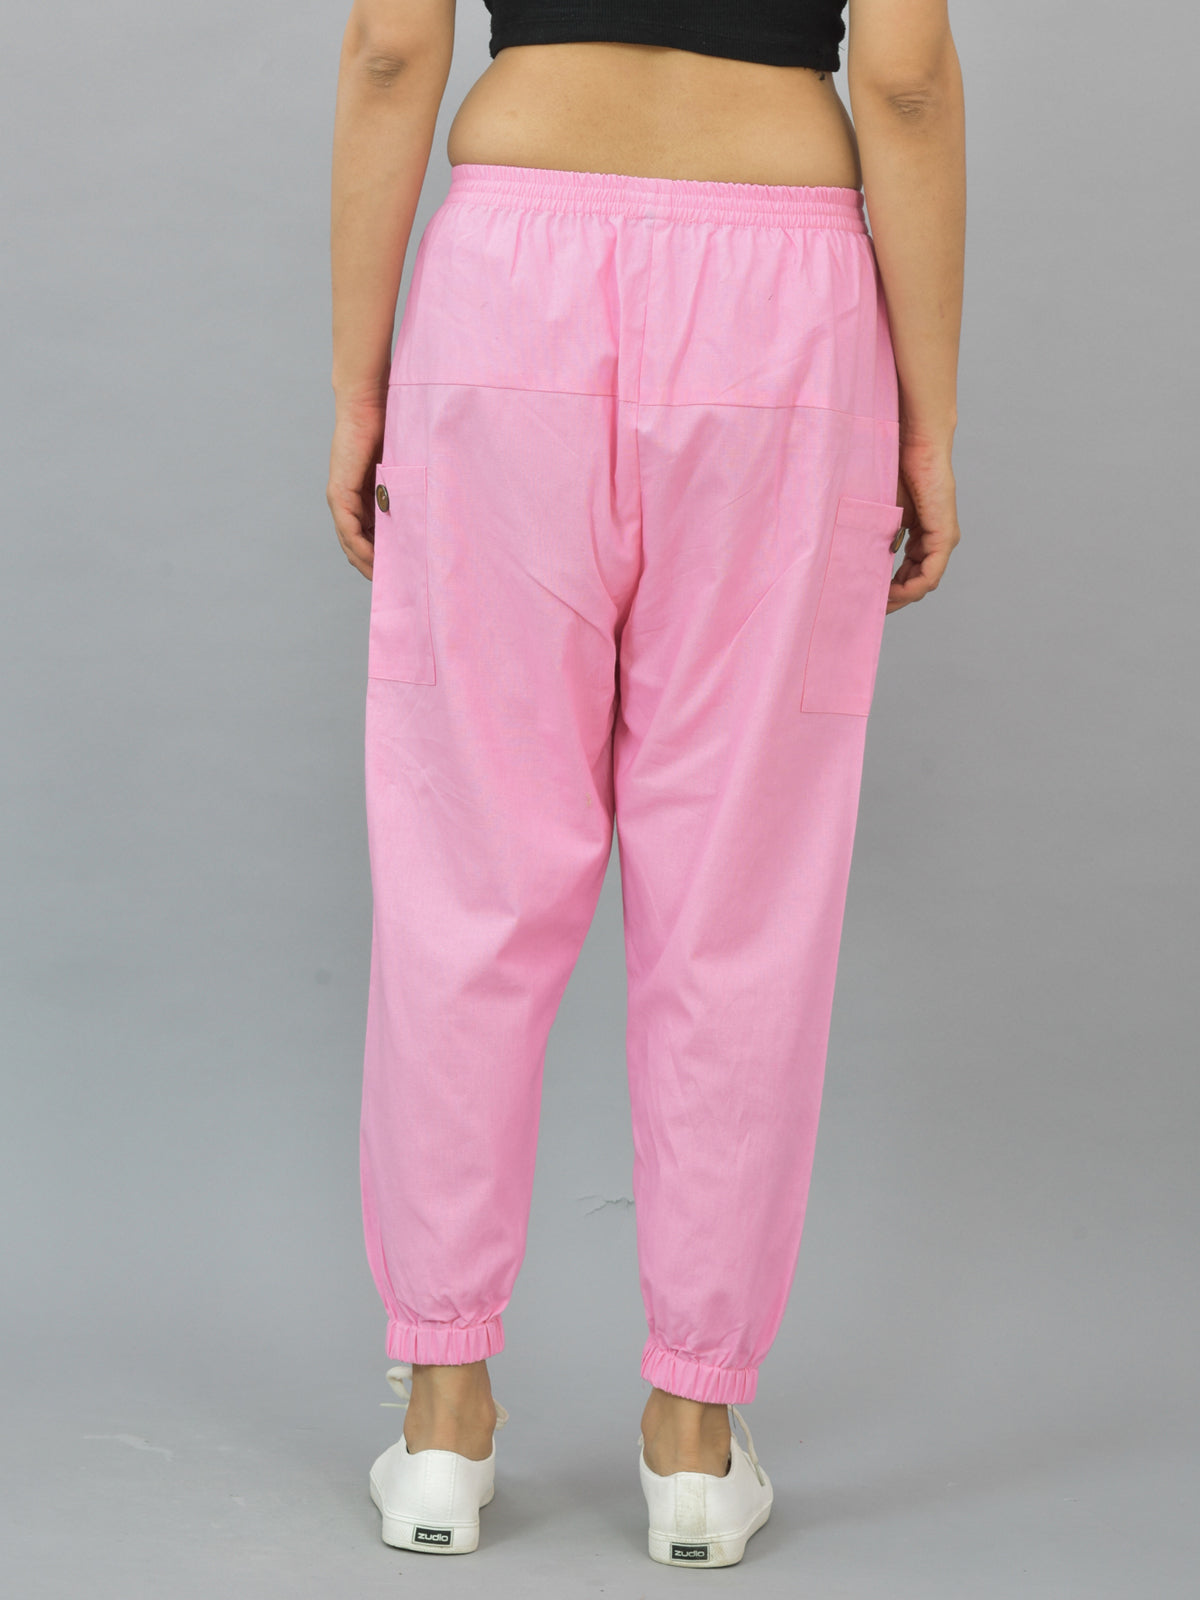 Combo Pack Of Womens Dark Blue And Pink Four Pocket Cotton Cargo Pants